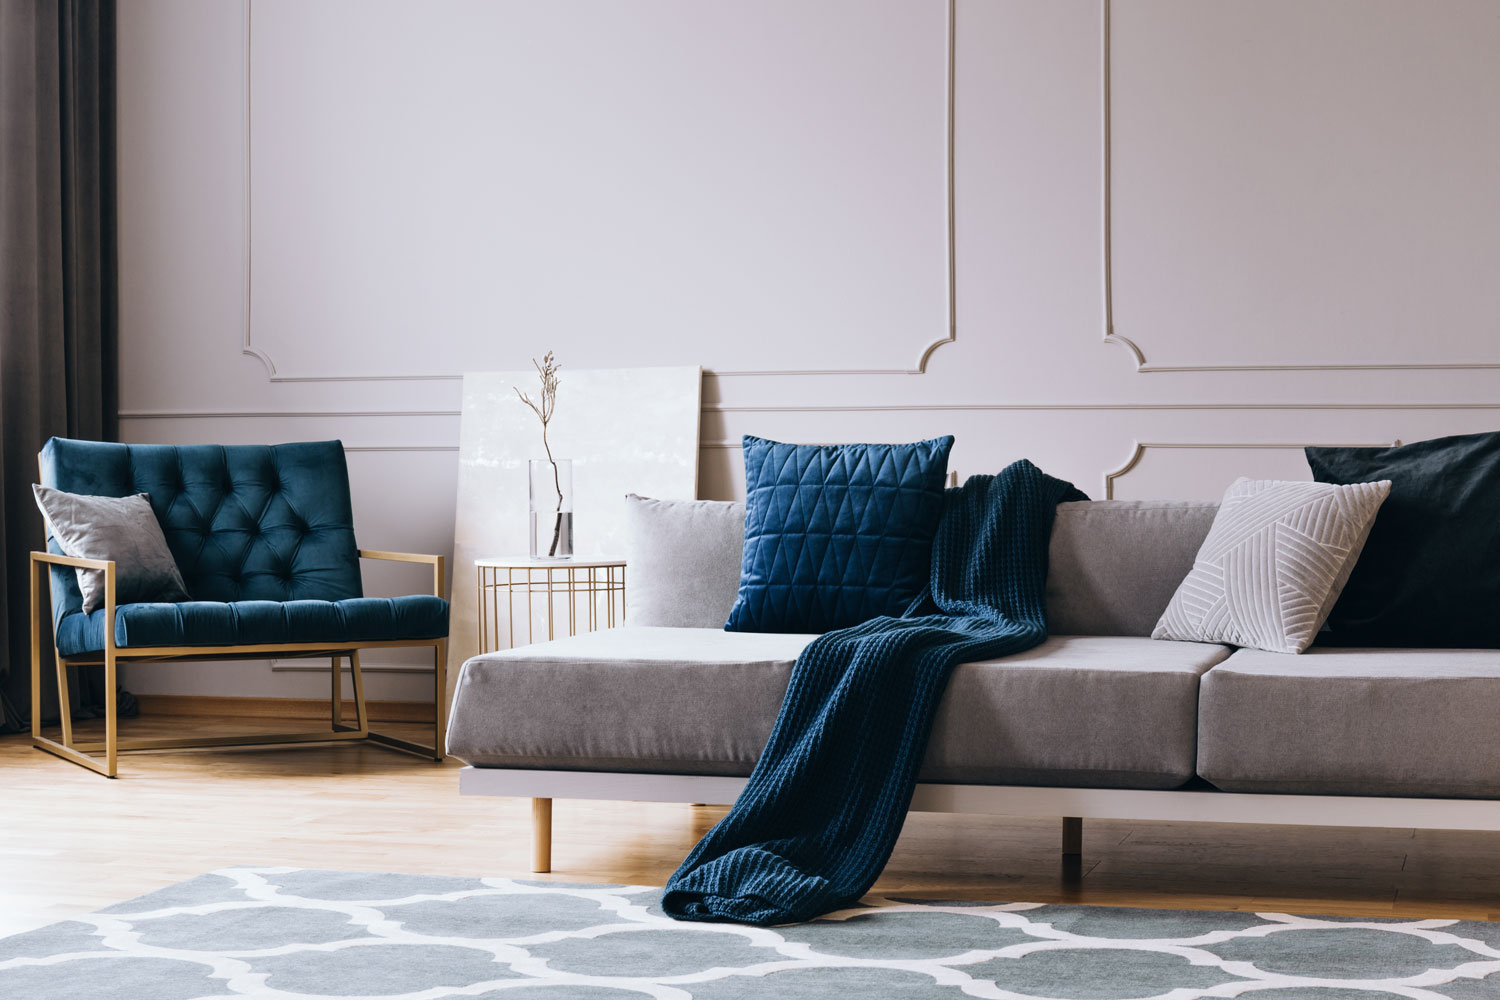 Gray sofas and chairs with blue foam and throw